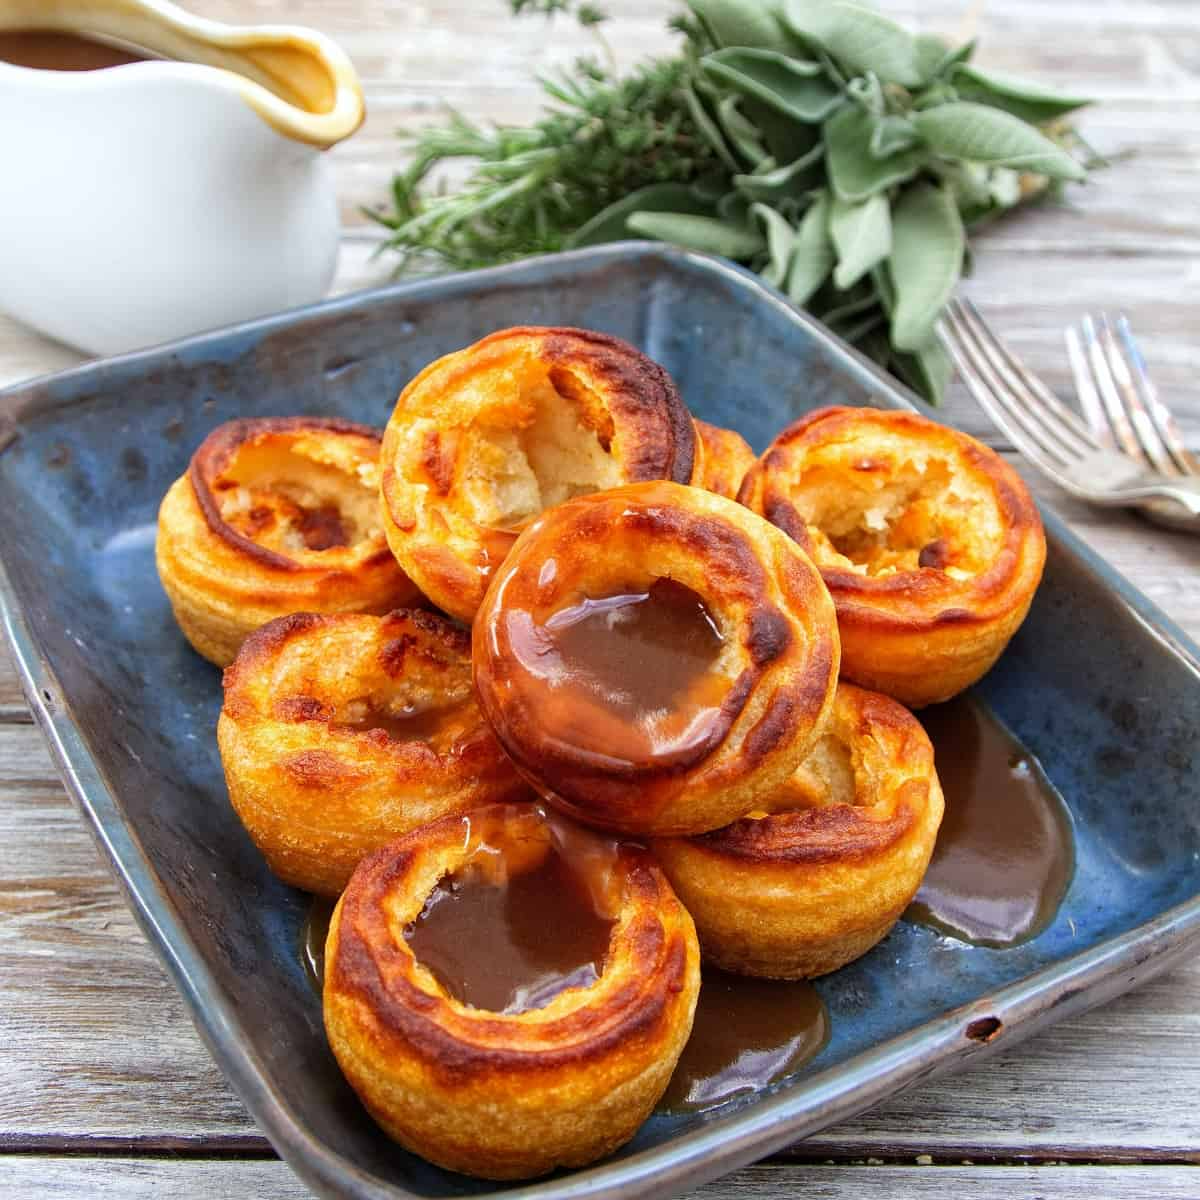 make your own (vegan) Yorkshire puddings